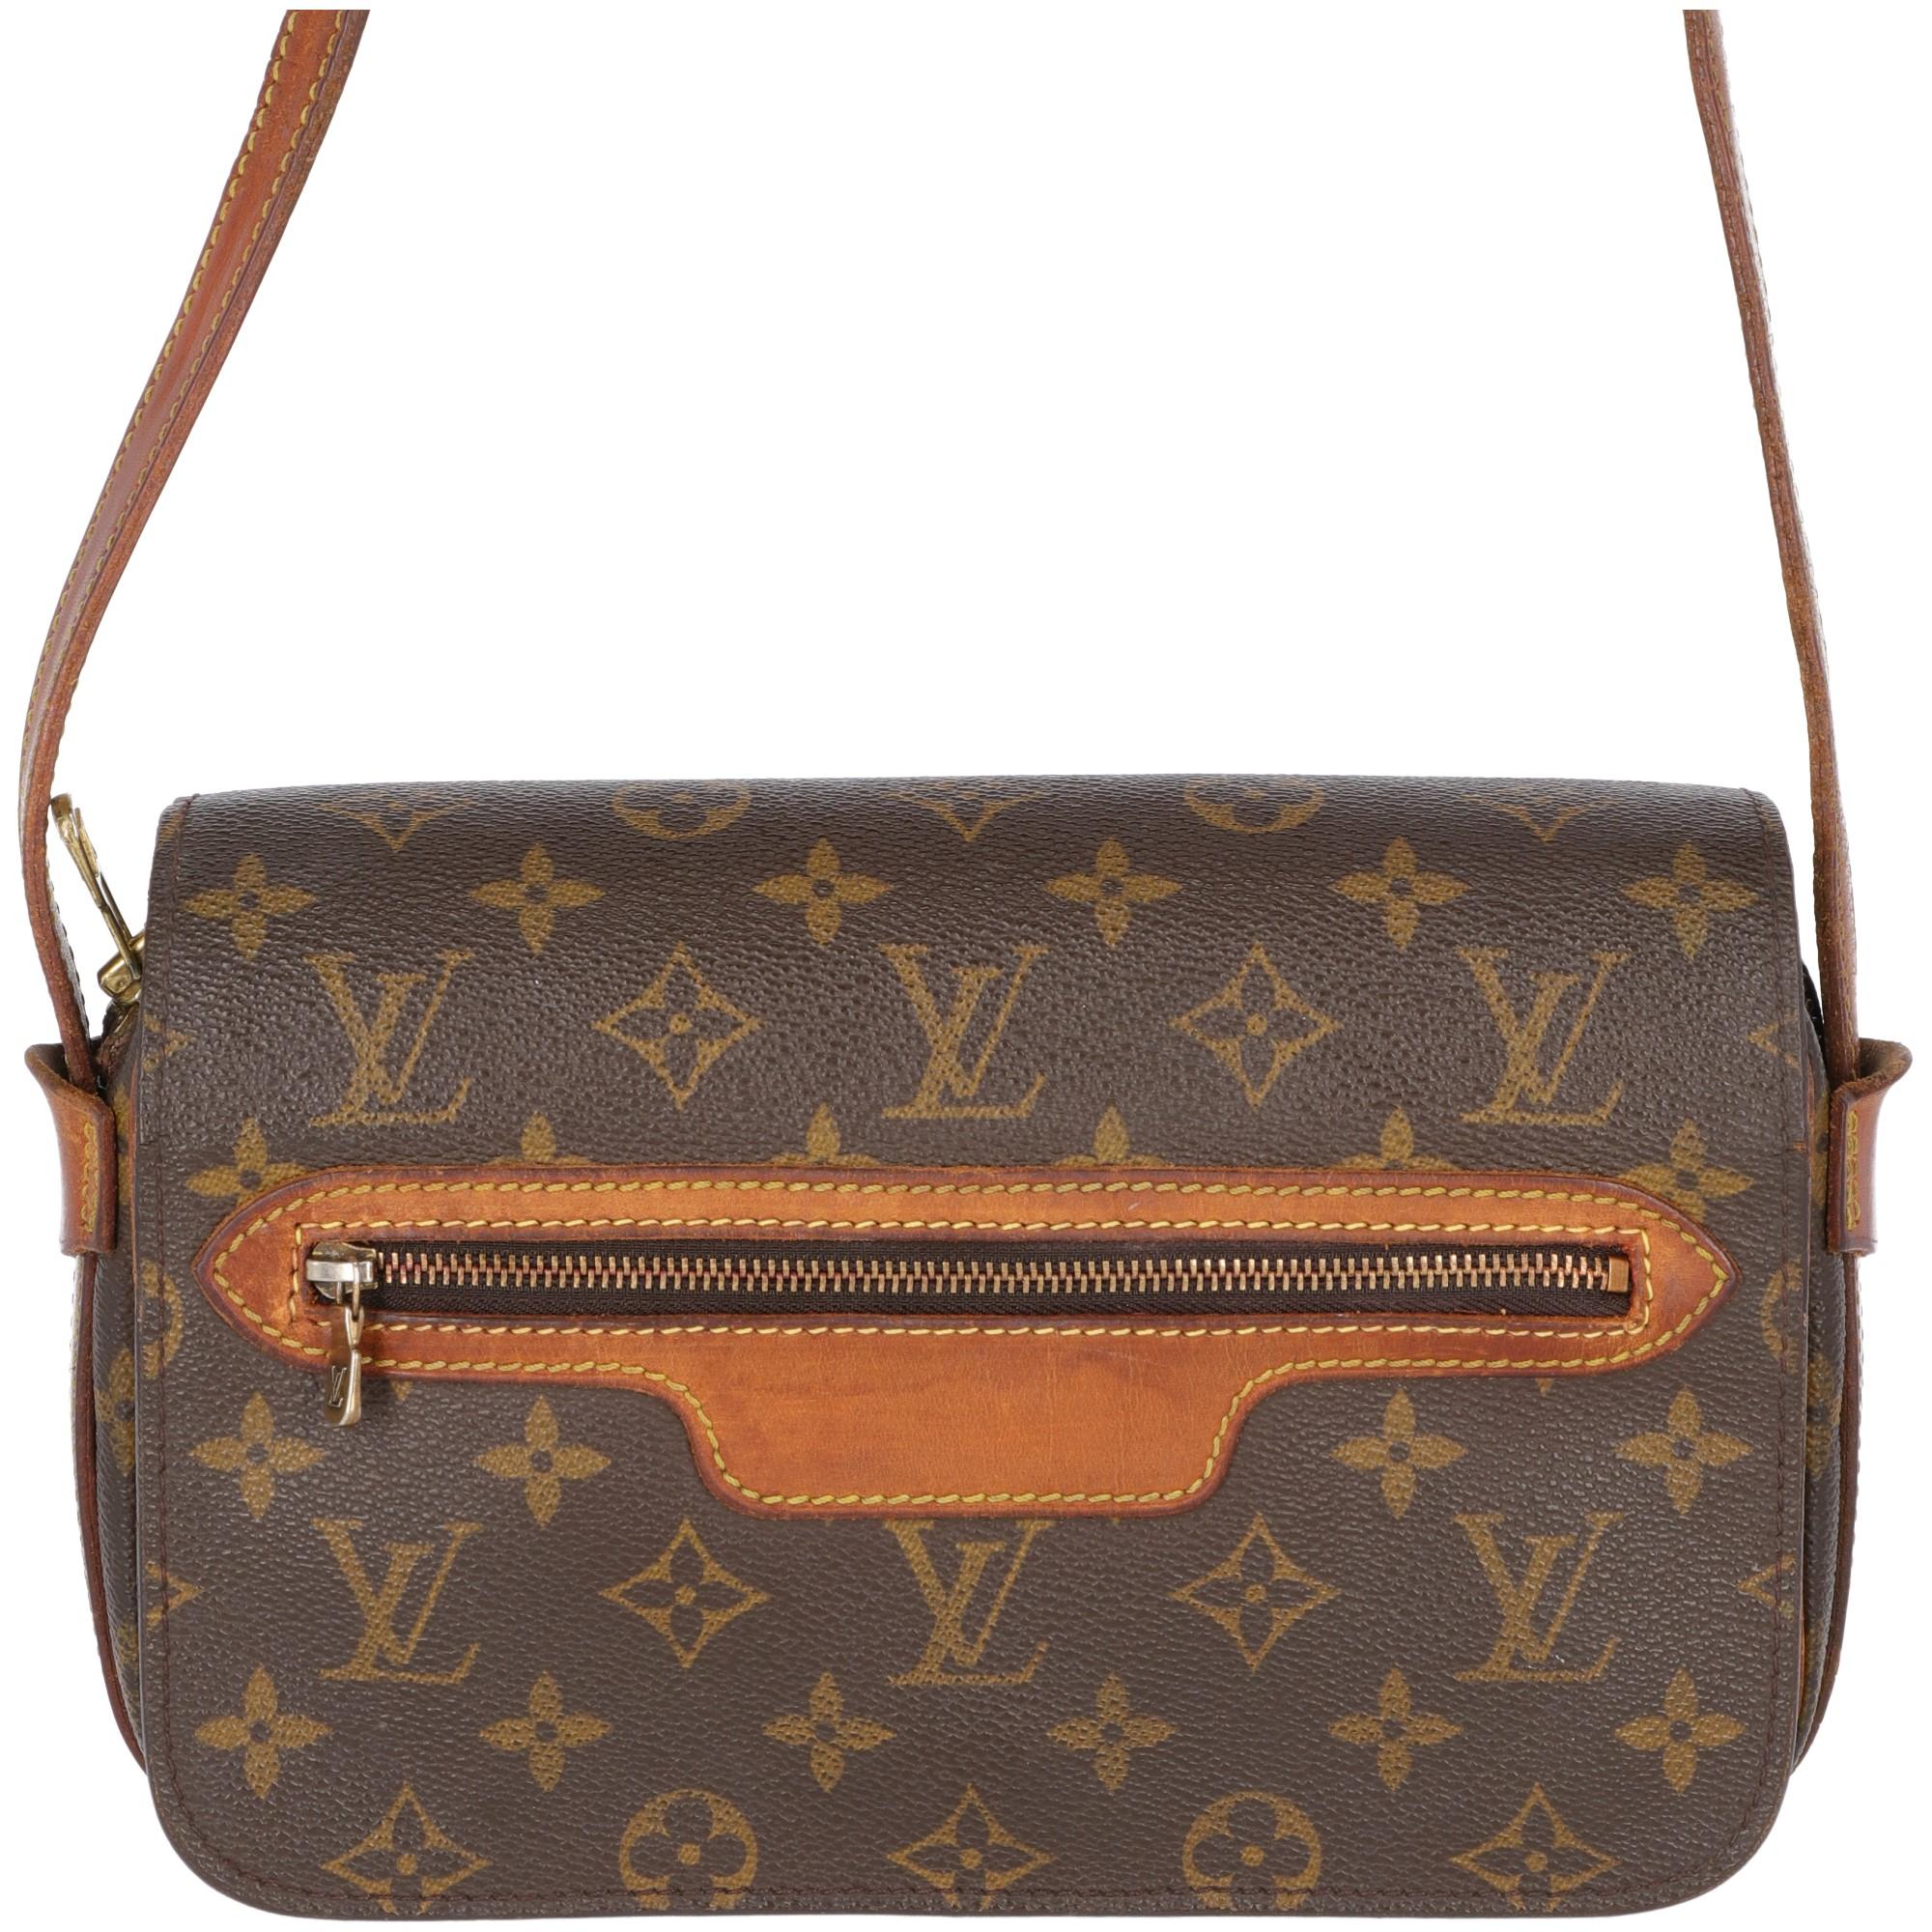 Louis Vuitton brown monogram canvas and leather shoulder bag with zip and press stud button fastening. With one front zip pocket on the flap and one zip pocket on the outer side of the bag. Shoulder strap is in brown real leather with metal buckle,